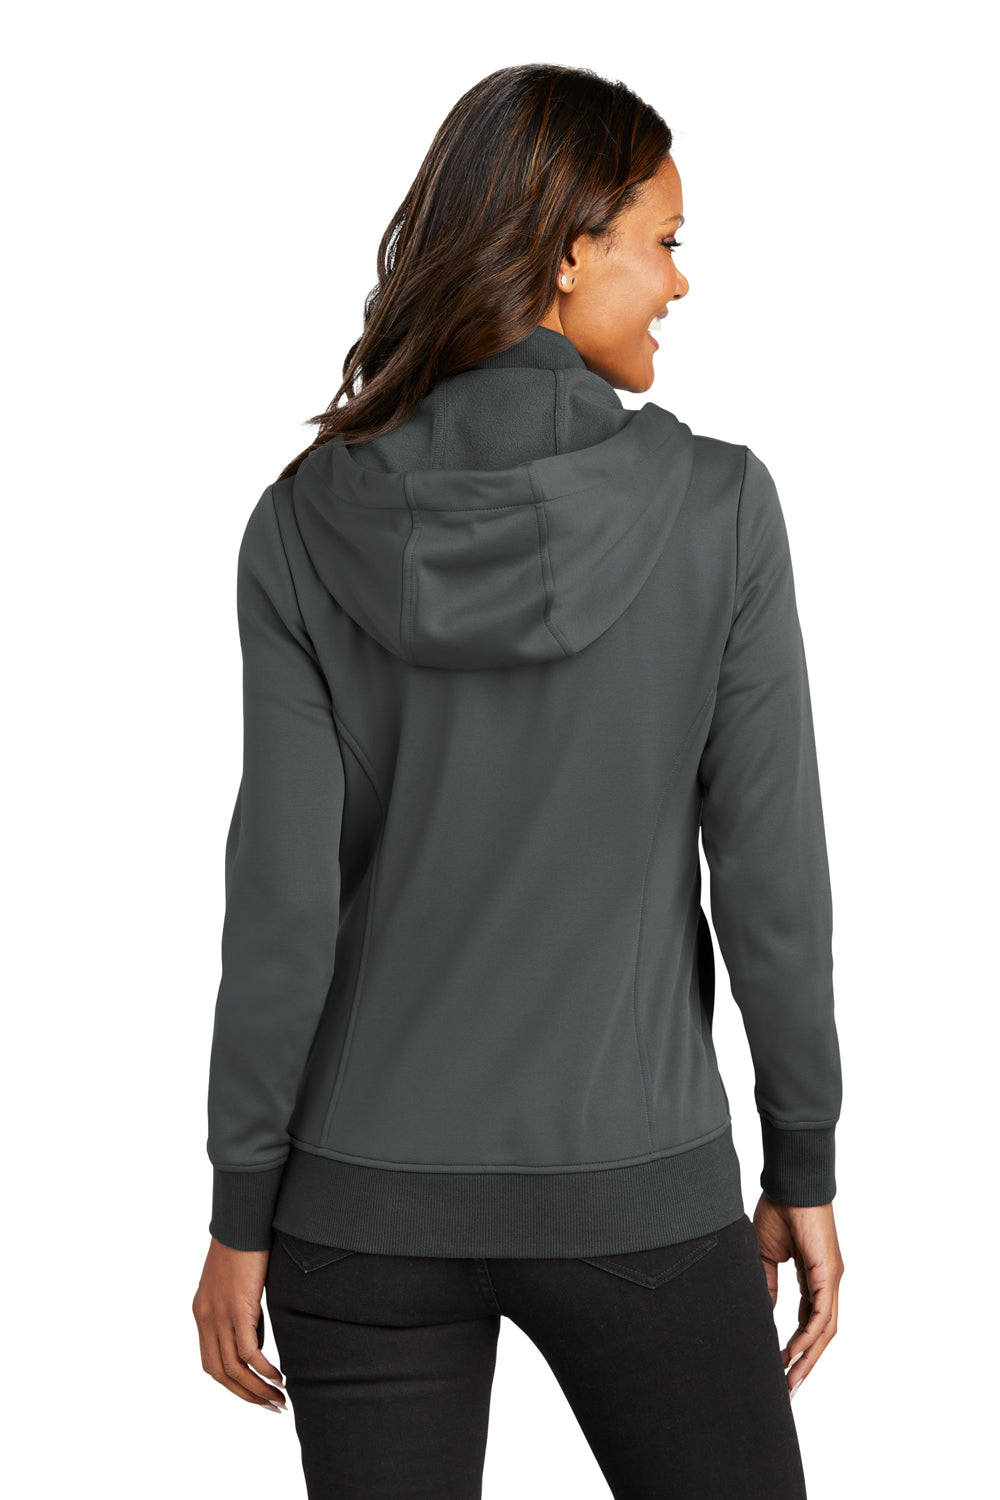 Port Authority L814 Womens Smooth Fleece Full Zip Hooded Jacket Graphite Grey Back